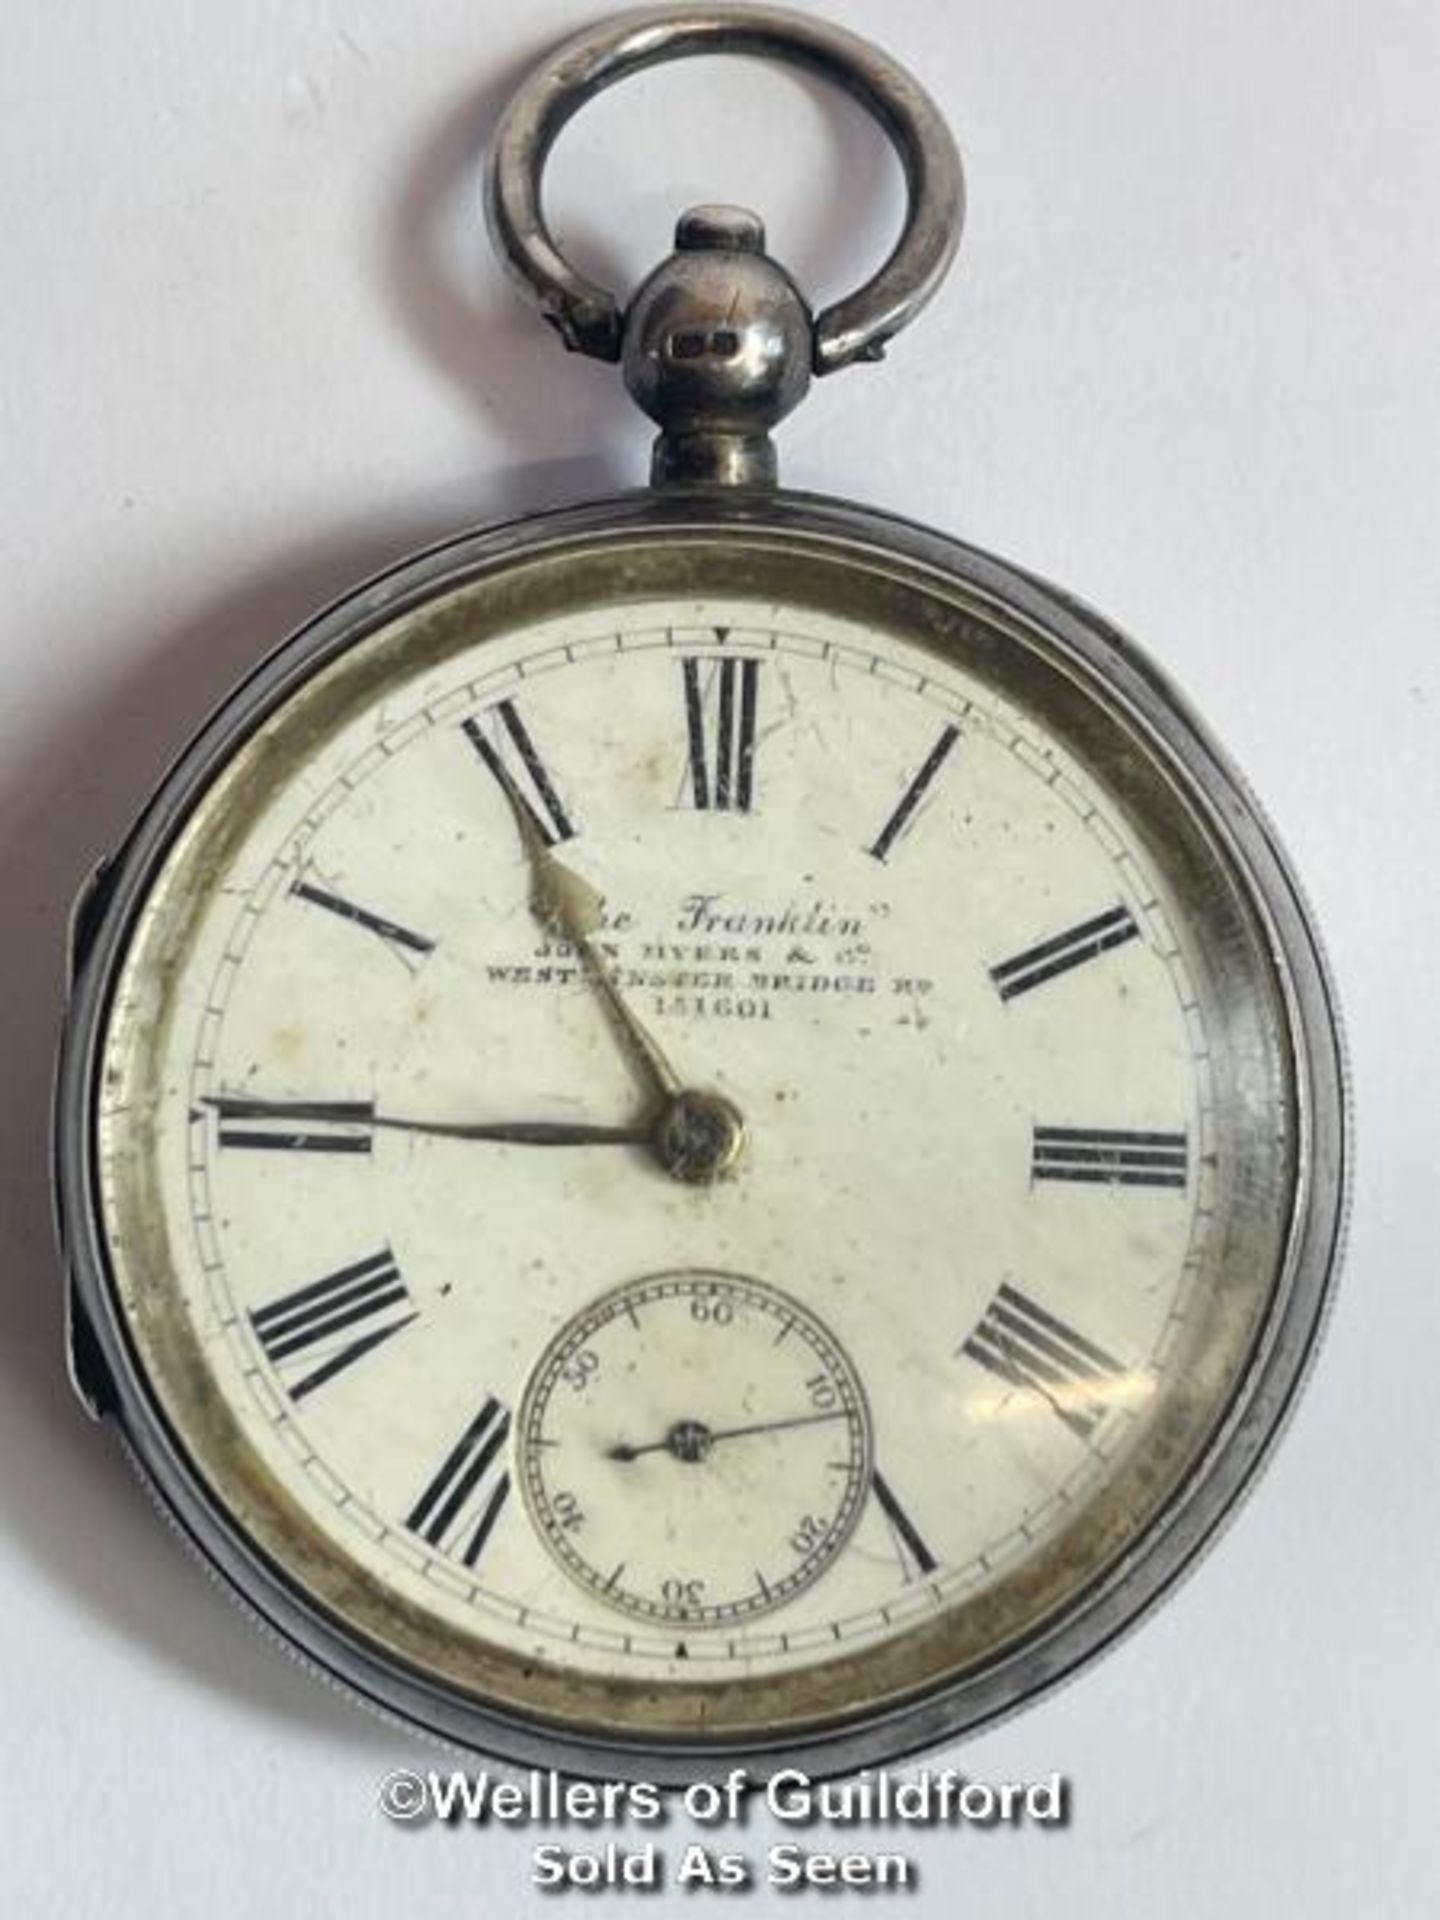 Hallmarked silver cased pocket watch "The Franklin" by John Myers & Co. Westminster Bridge Rd no.